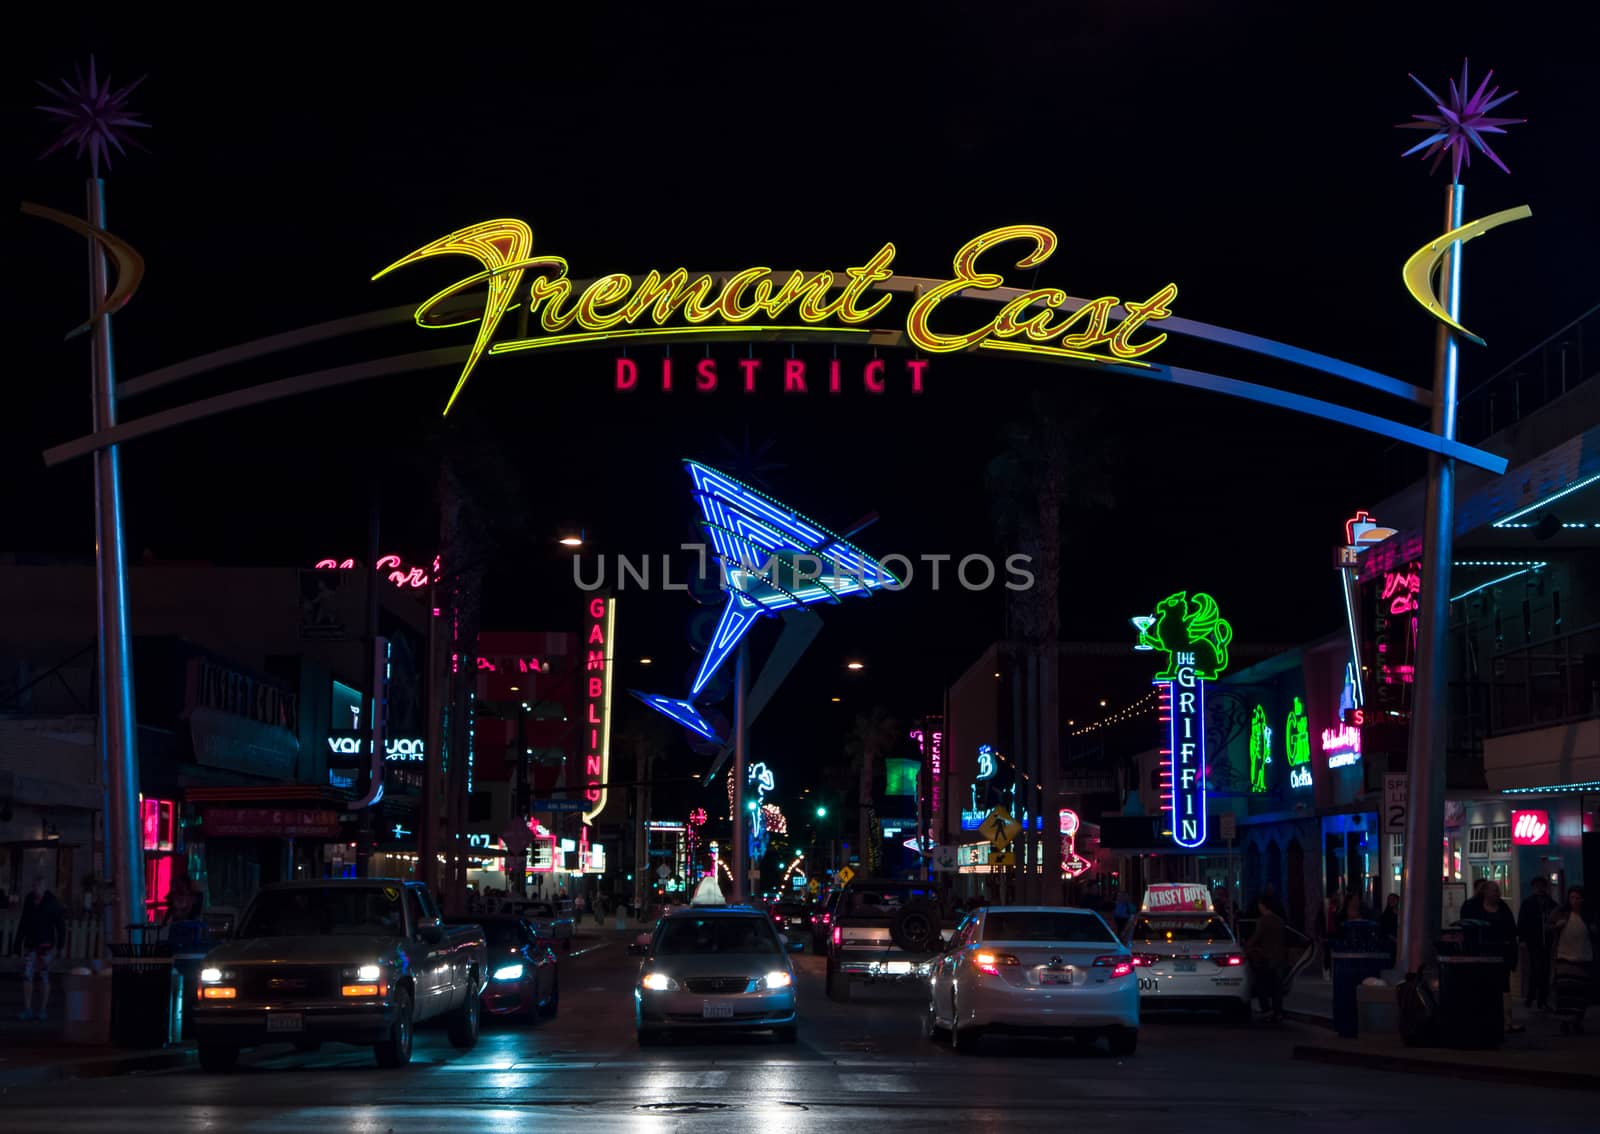 Fremont East District Entrance and Lights by wolterk